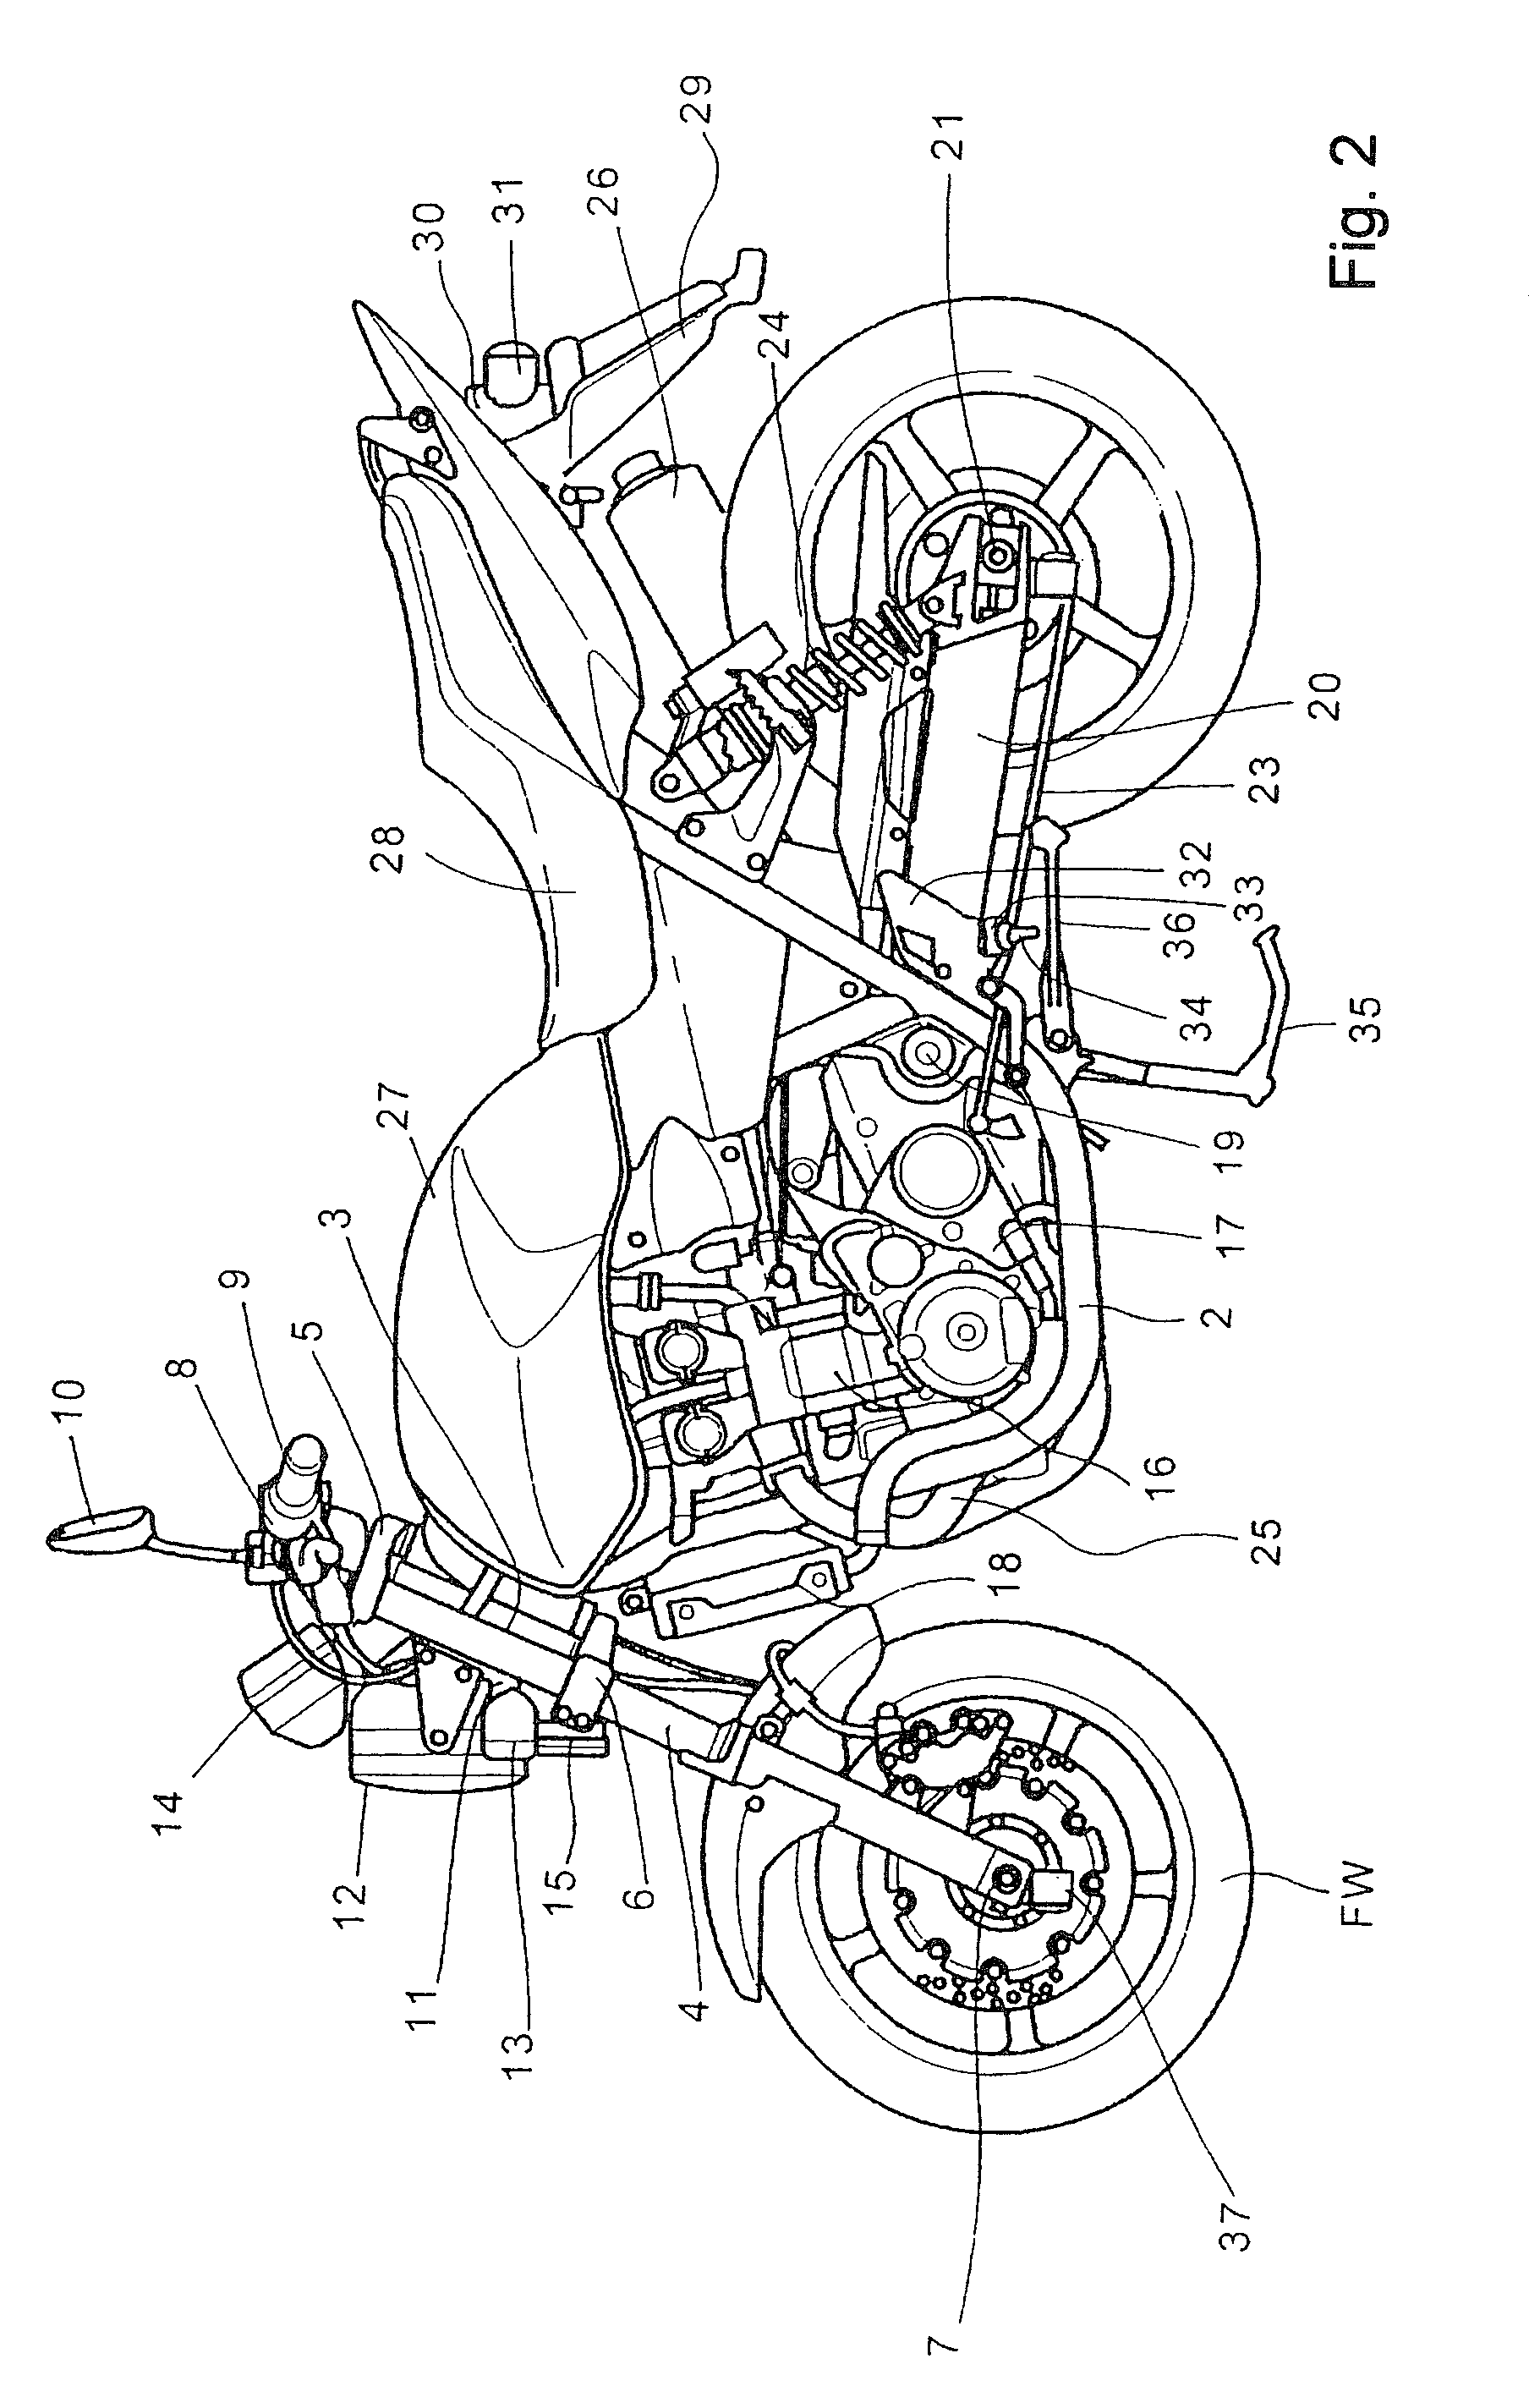 Lighting apparatus for motorcycle